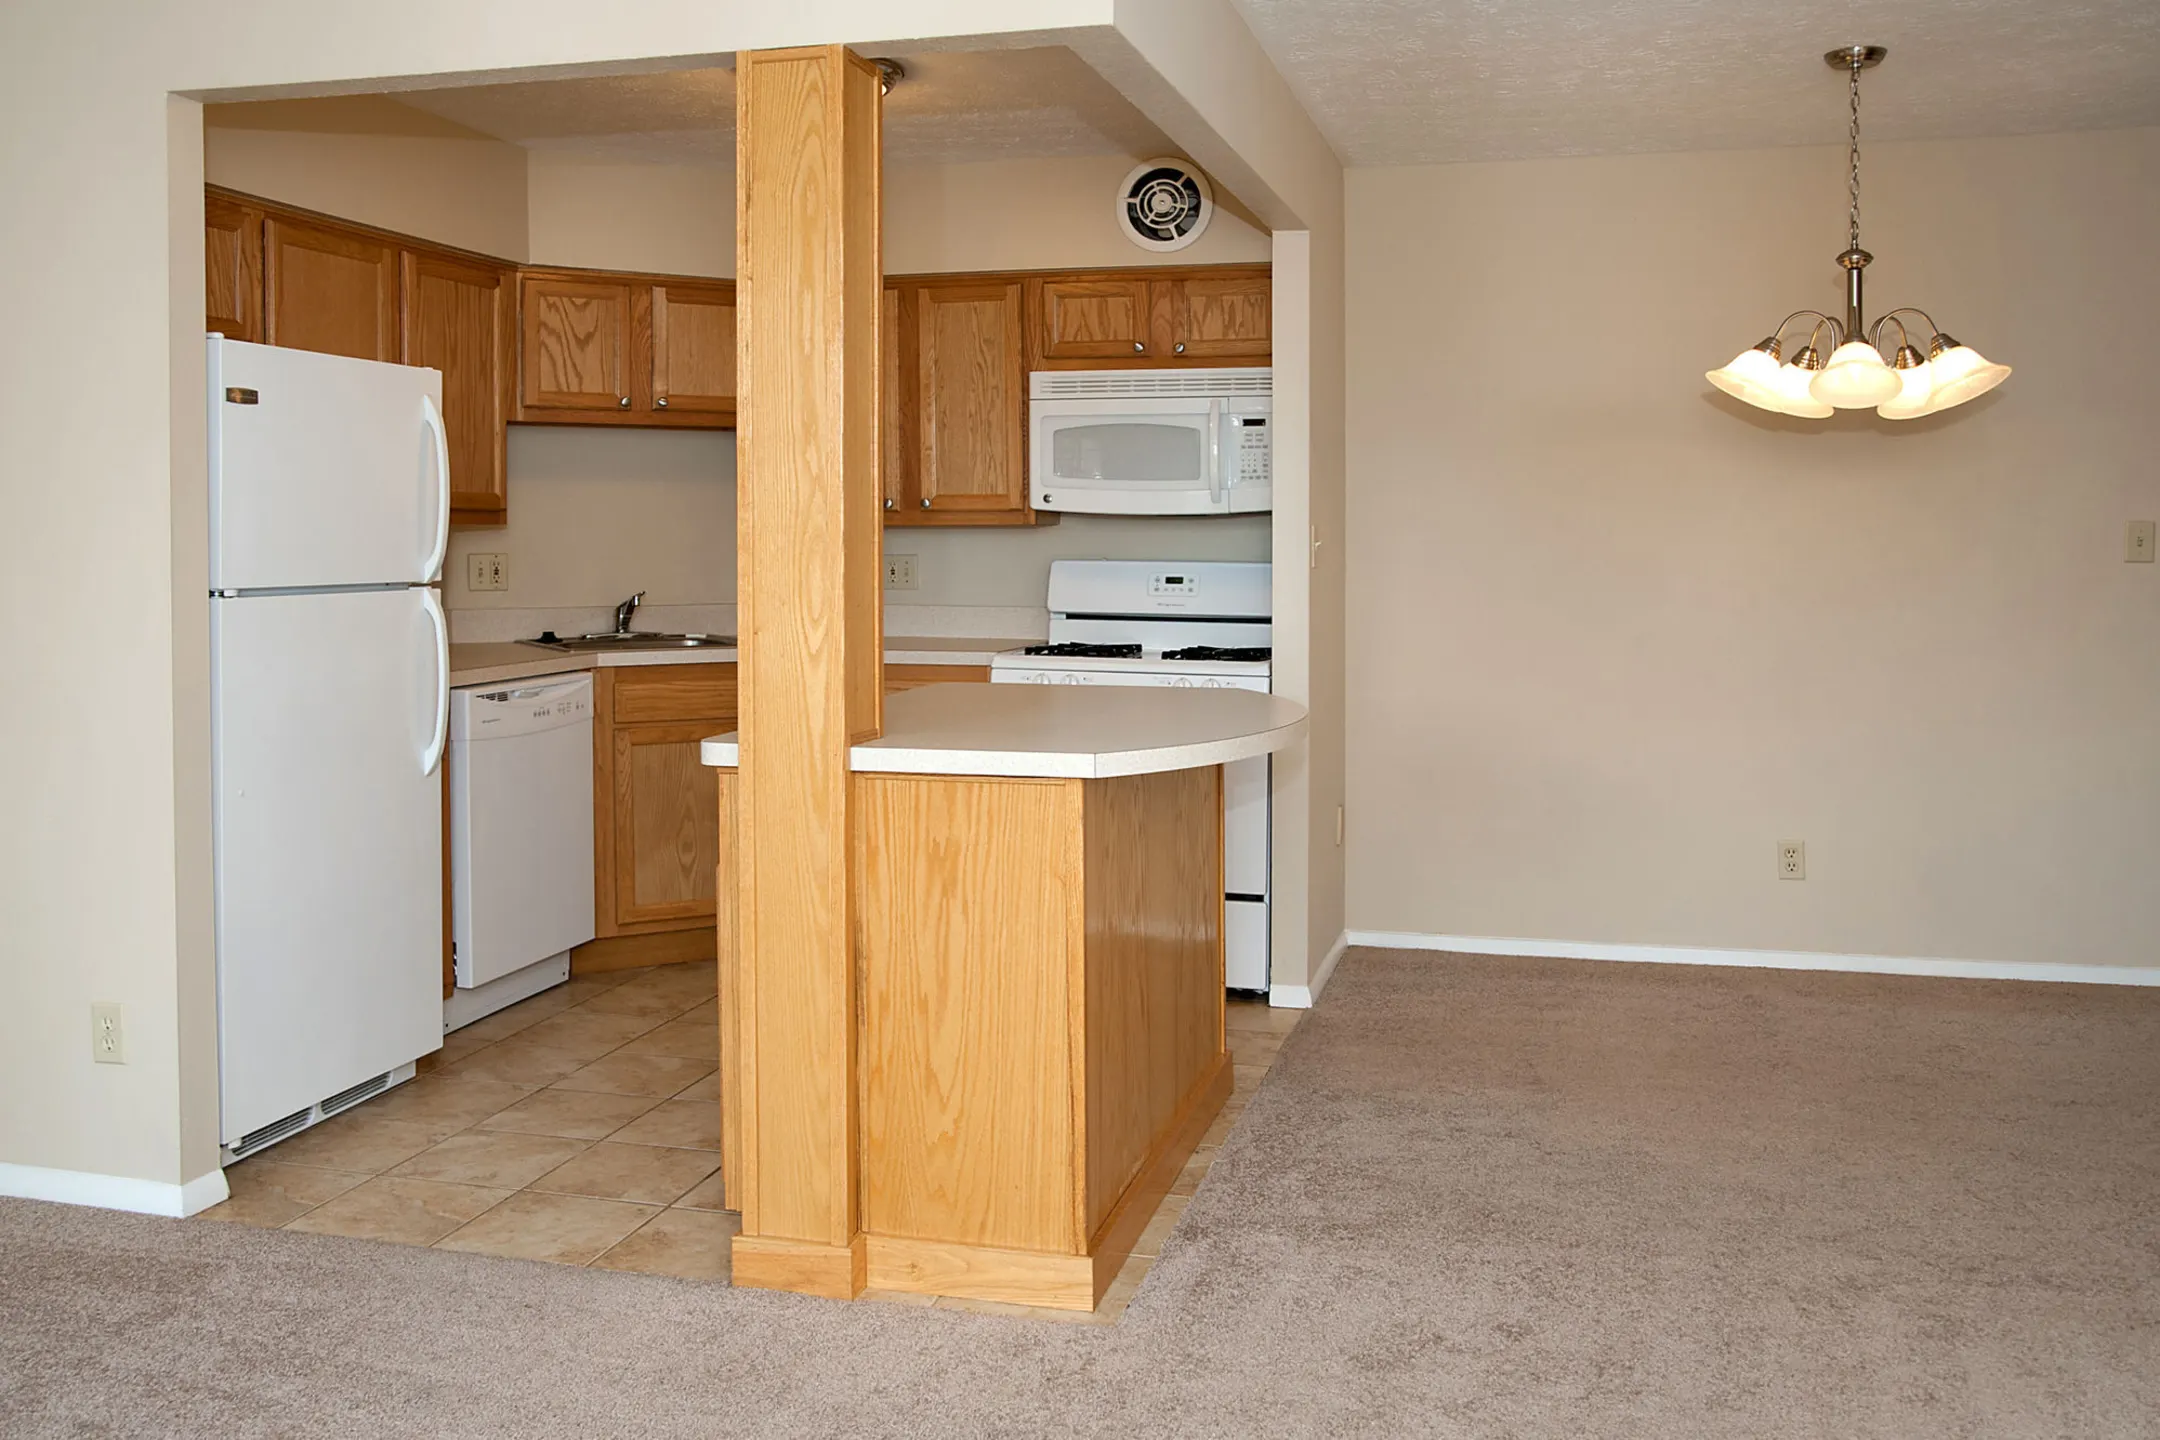 Kitchen - Rockside Park Towers - Bedford, OH